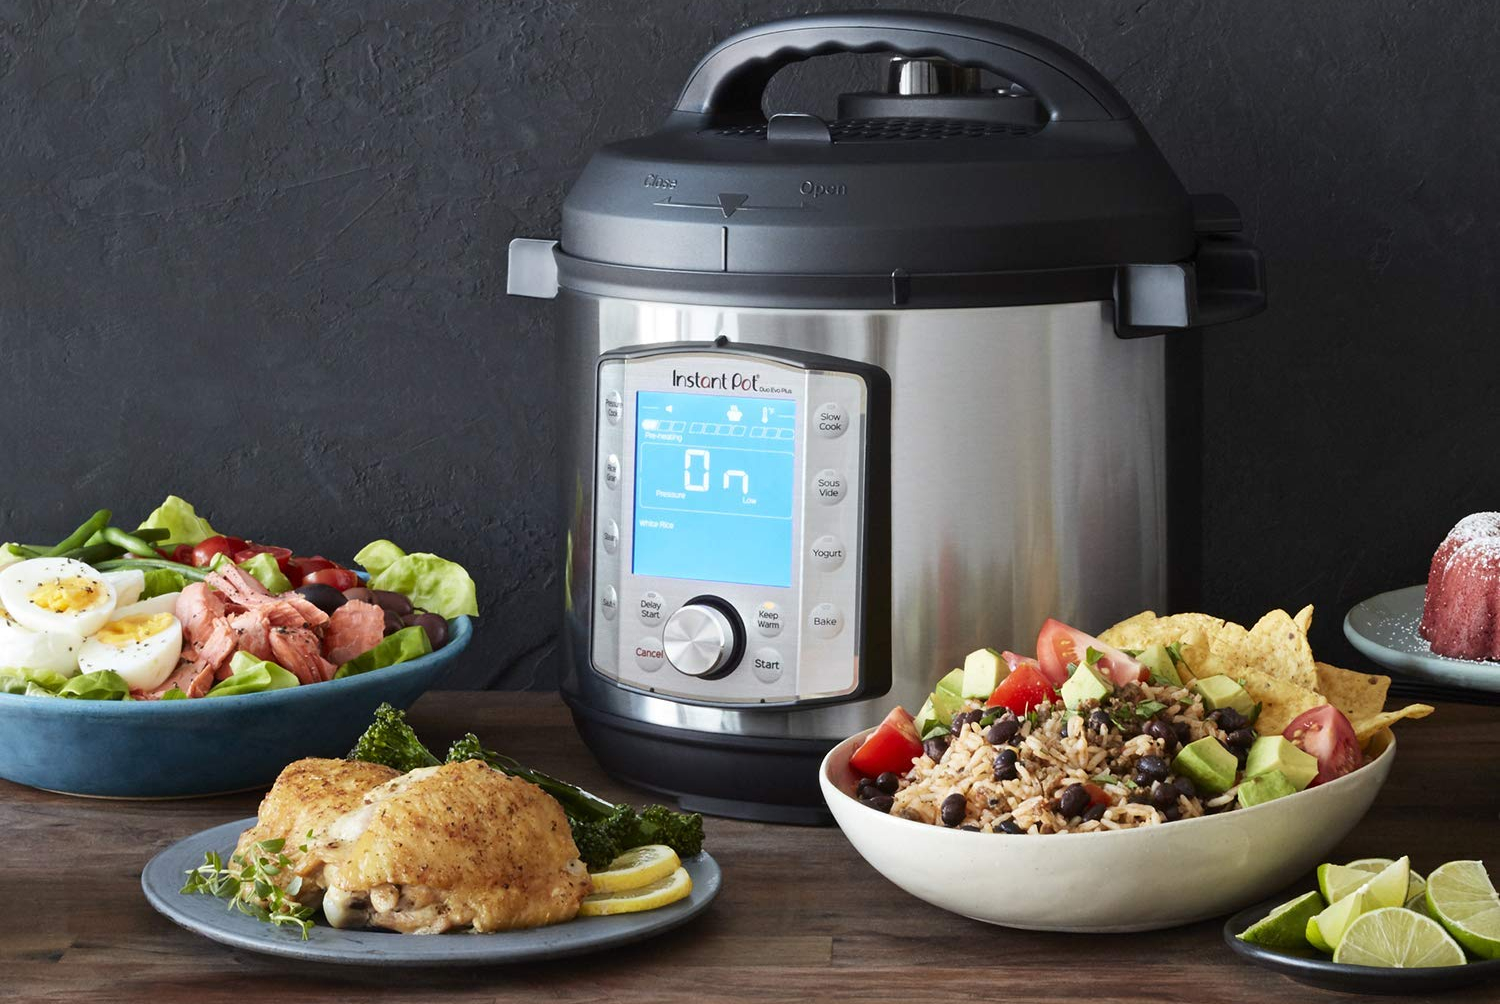 Instant Pot Duo Nova Review - Pressure Cooking Today™